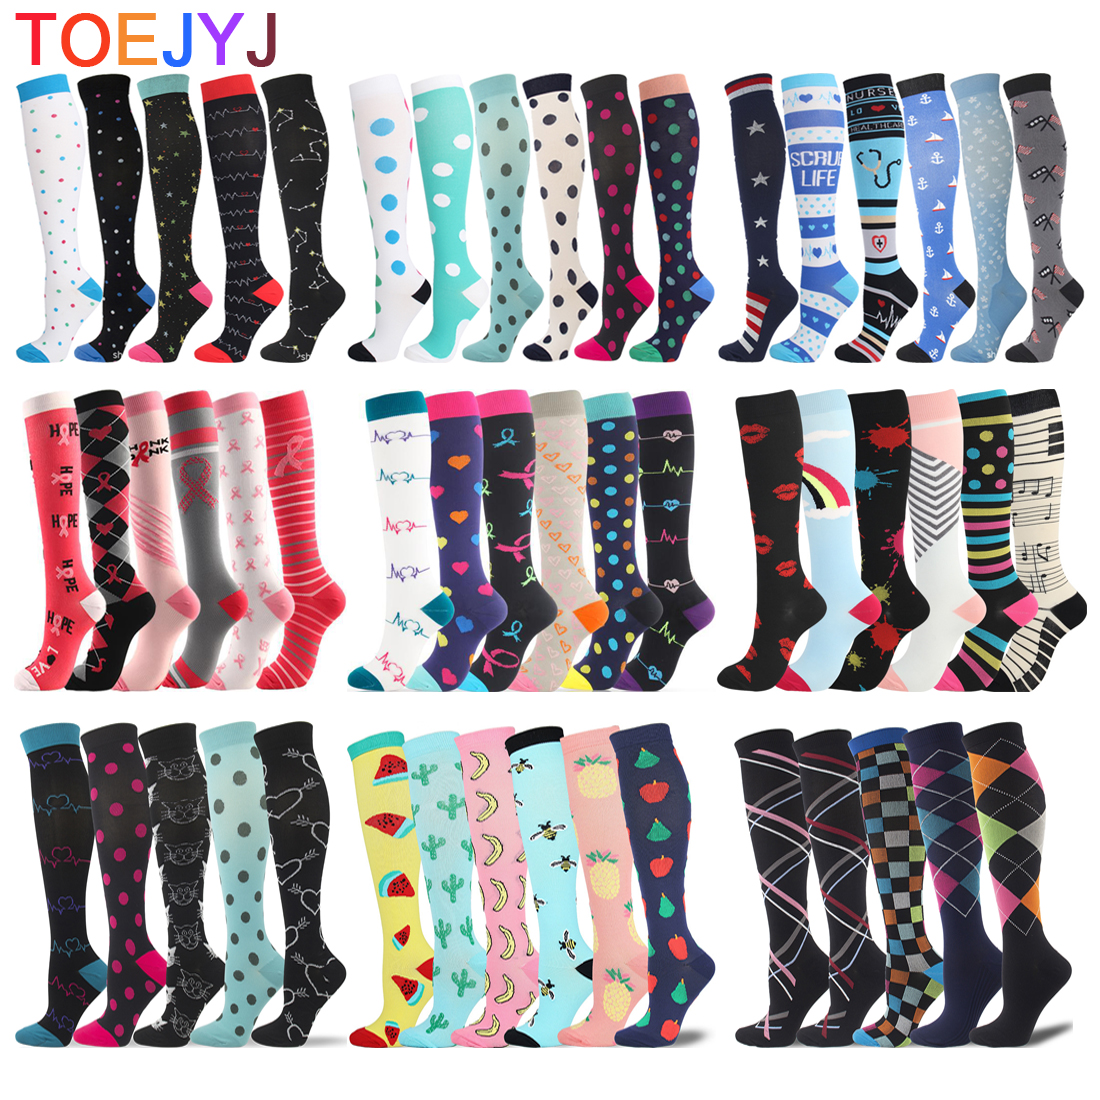 

Compression Sos for Women and Men 5/6 Pairs Best Fit for Varicose Veins Athletic Travel Running Cycling Street Knee High Sos, 5 pairs- ys001